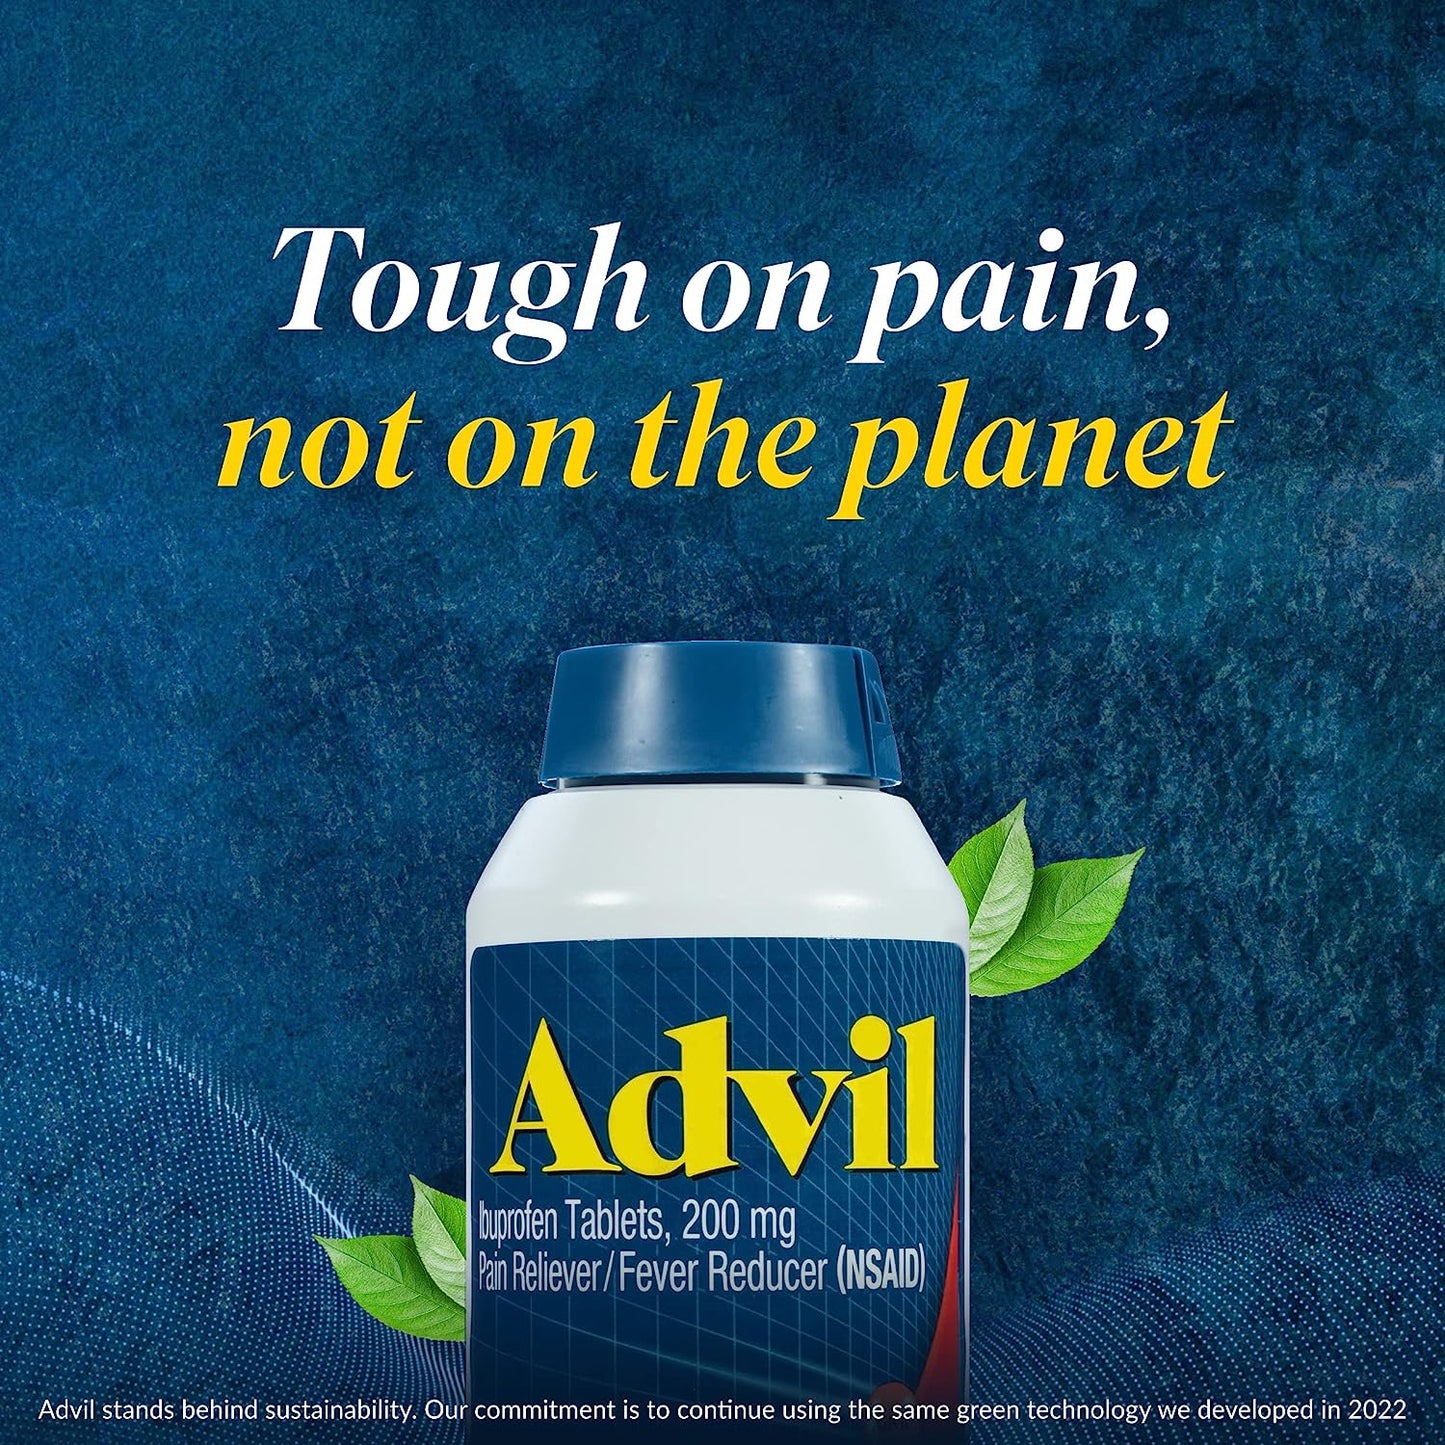 Advil Pain Reliever and Fever Reducer, Ibuprofen 200mg - 24 Coated Tablets